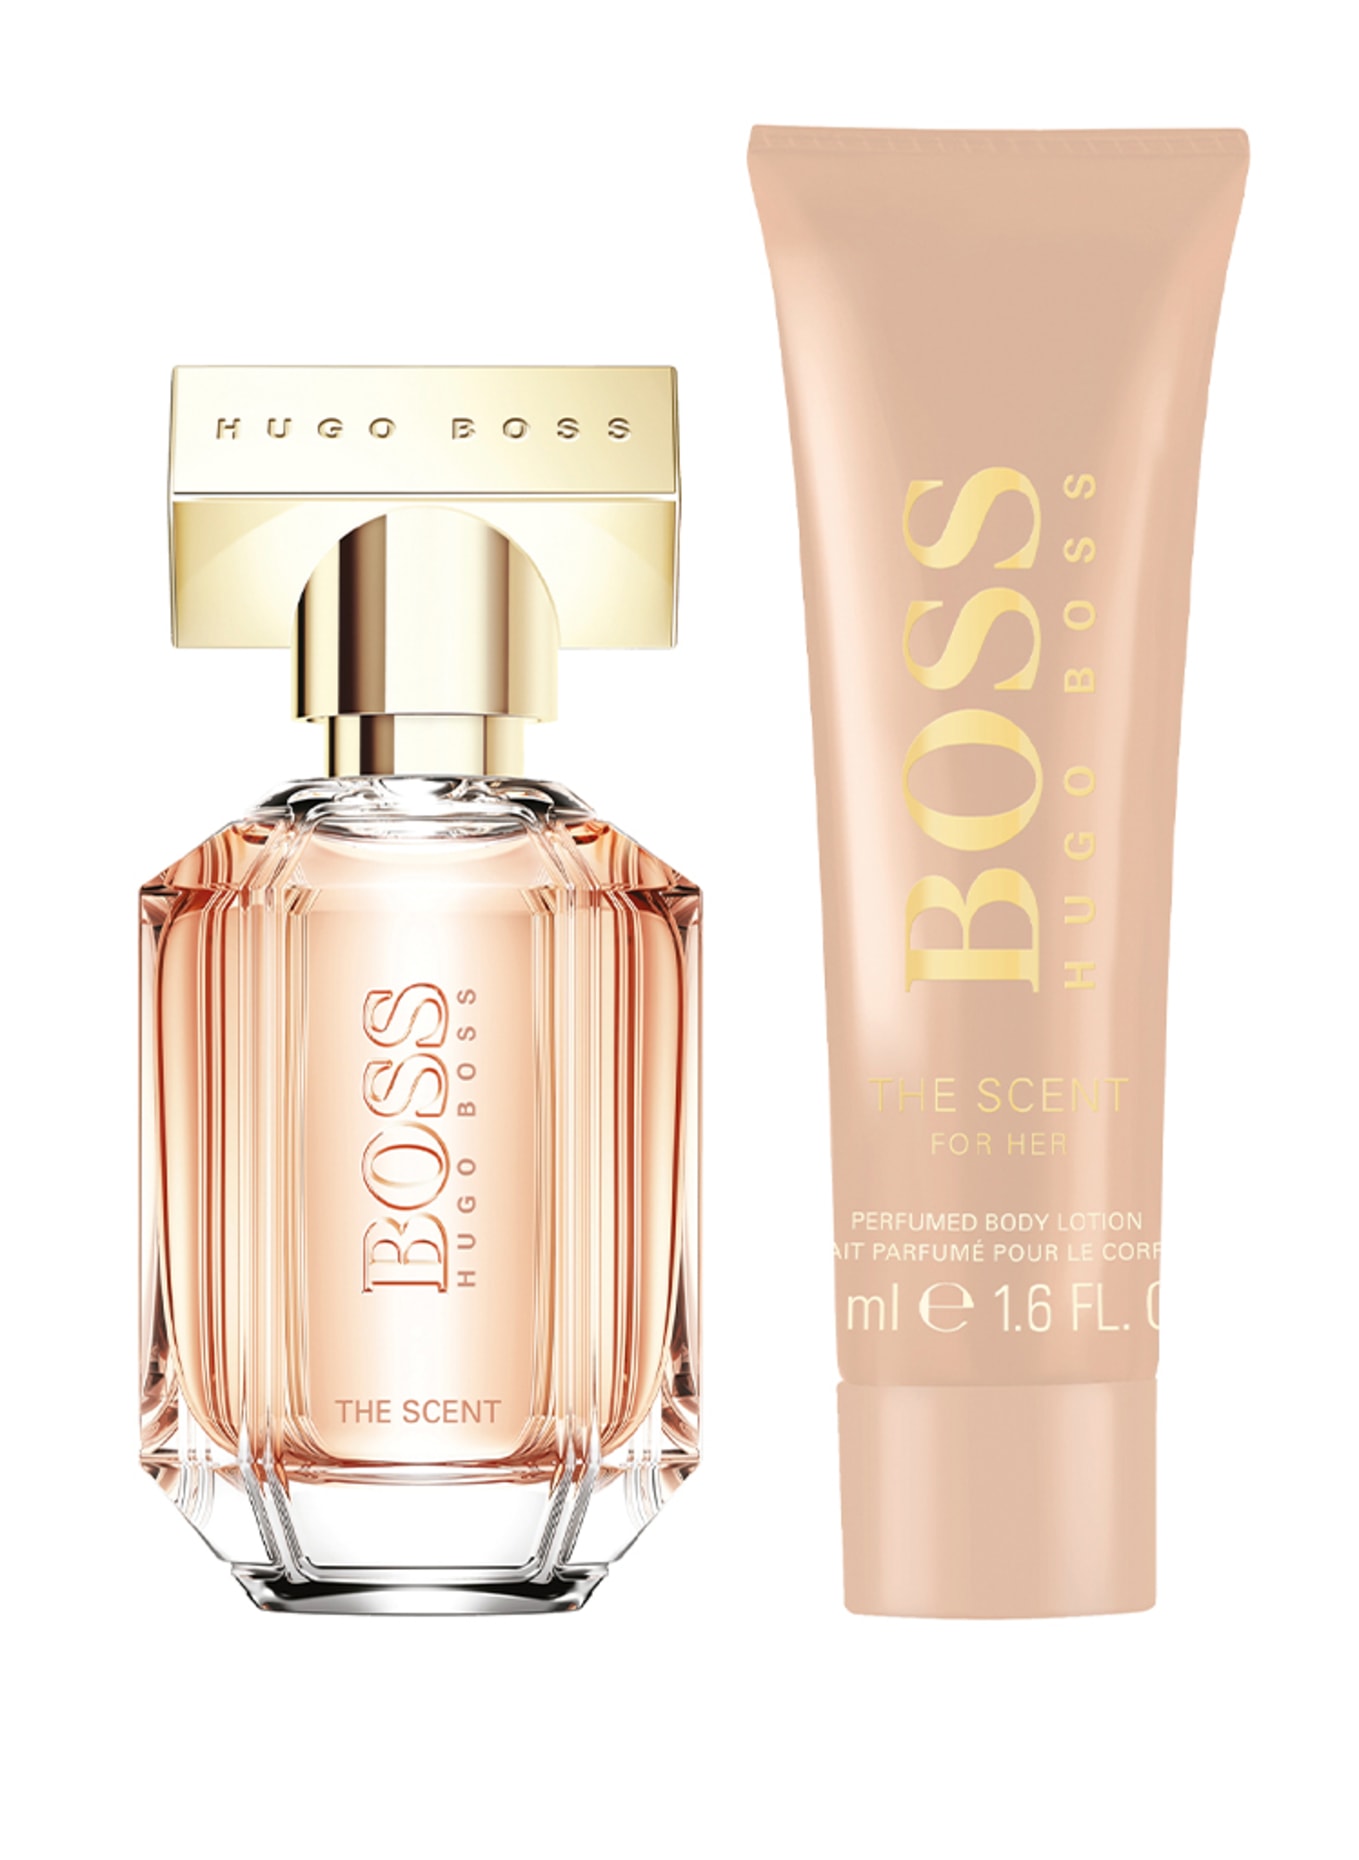 BOSS THE SCENT FOR HER (Obrázek 2)